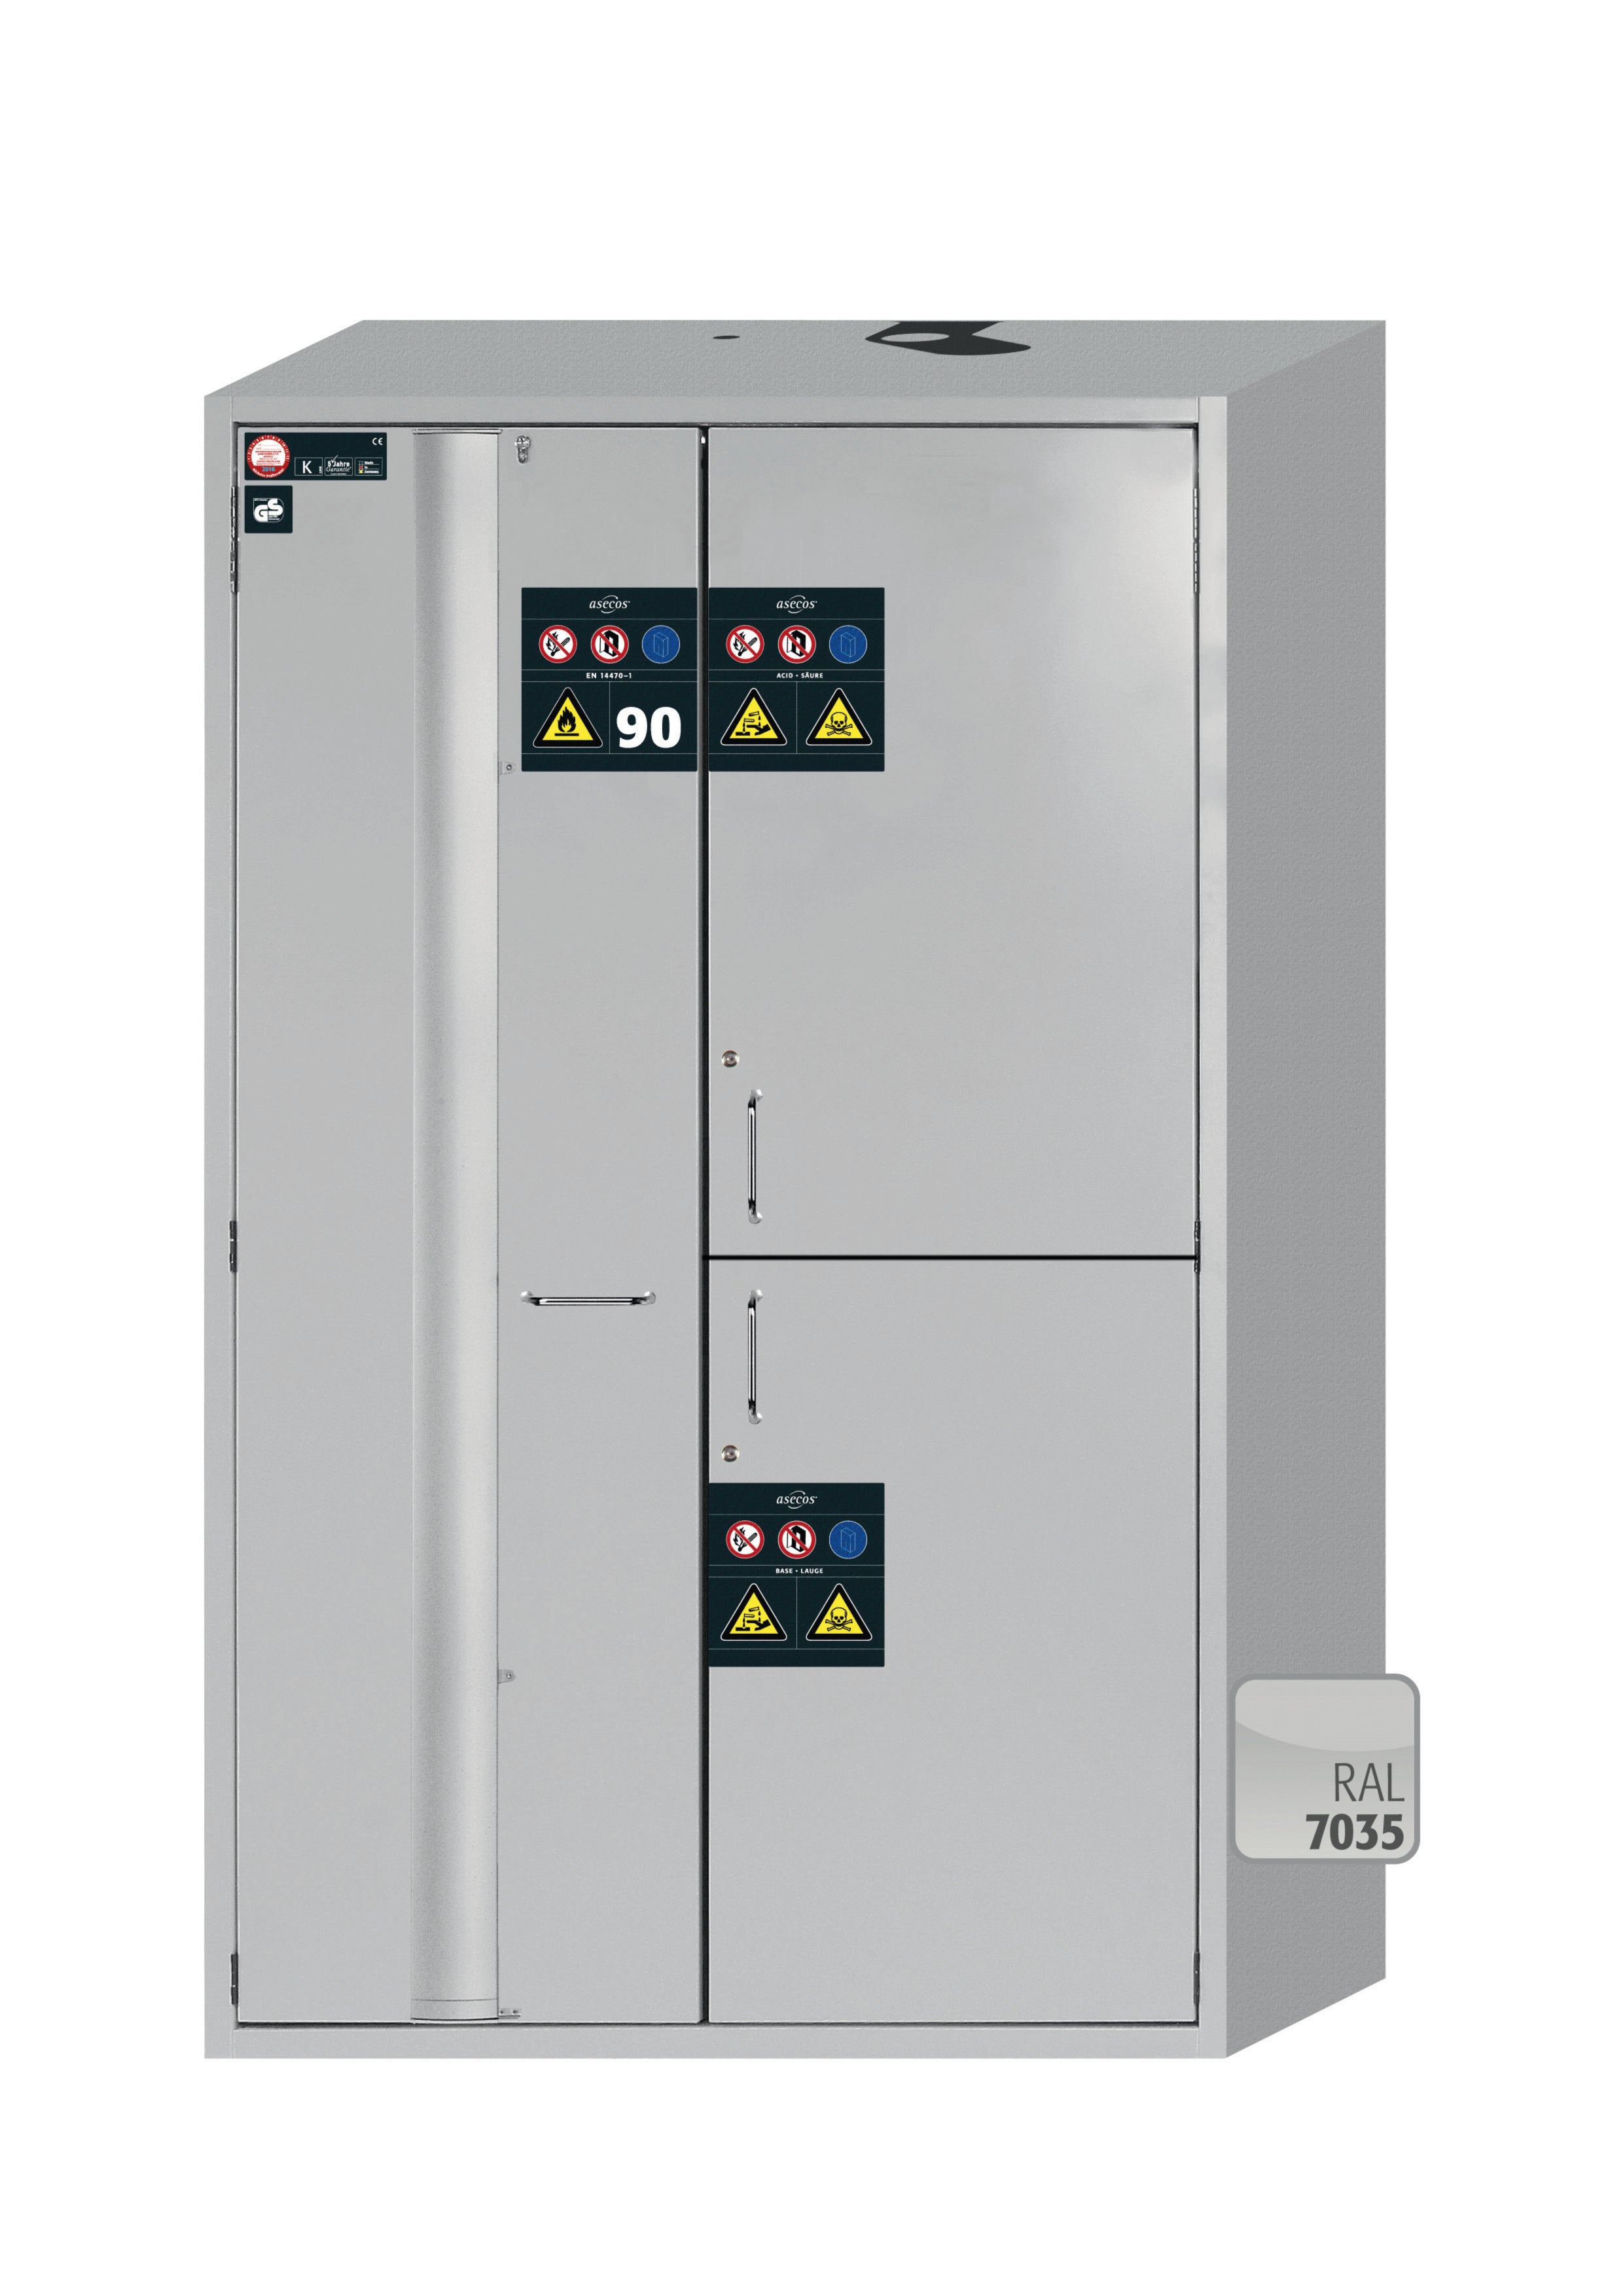 Type 90 combination safety cabinet K-PHOENIX Vol.2-90 model K90.196.120.MF.FWAC in light gray RAL 7035 with 3x standard shelves (sheet steel)